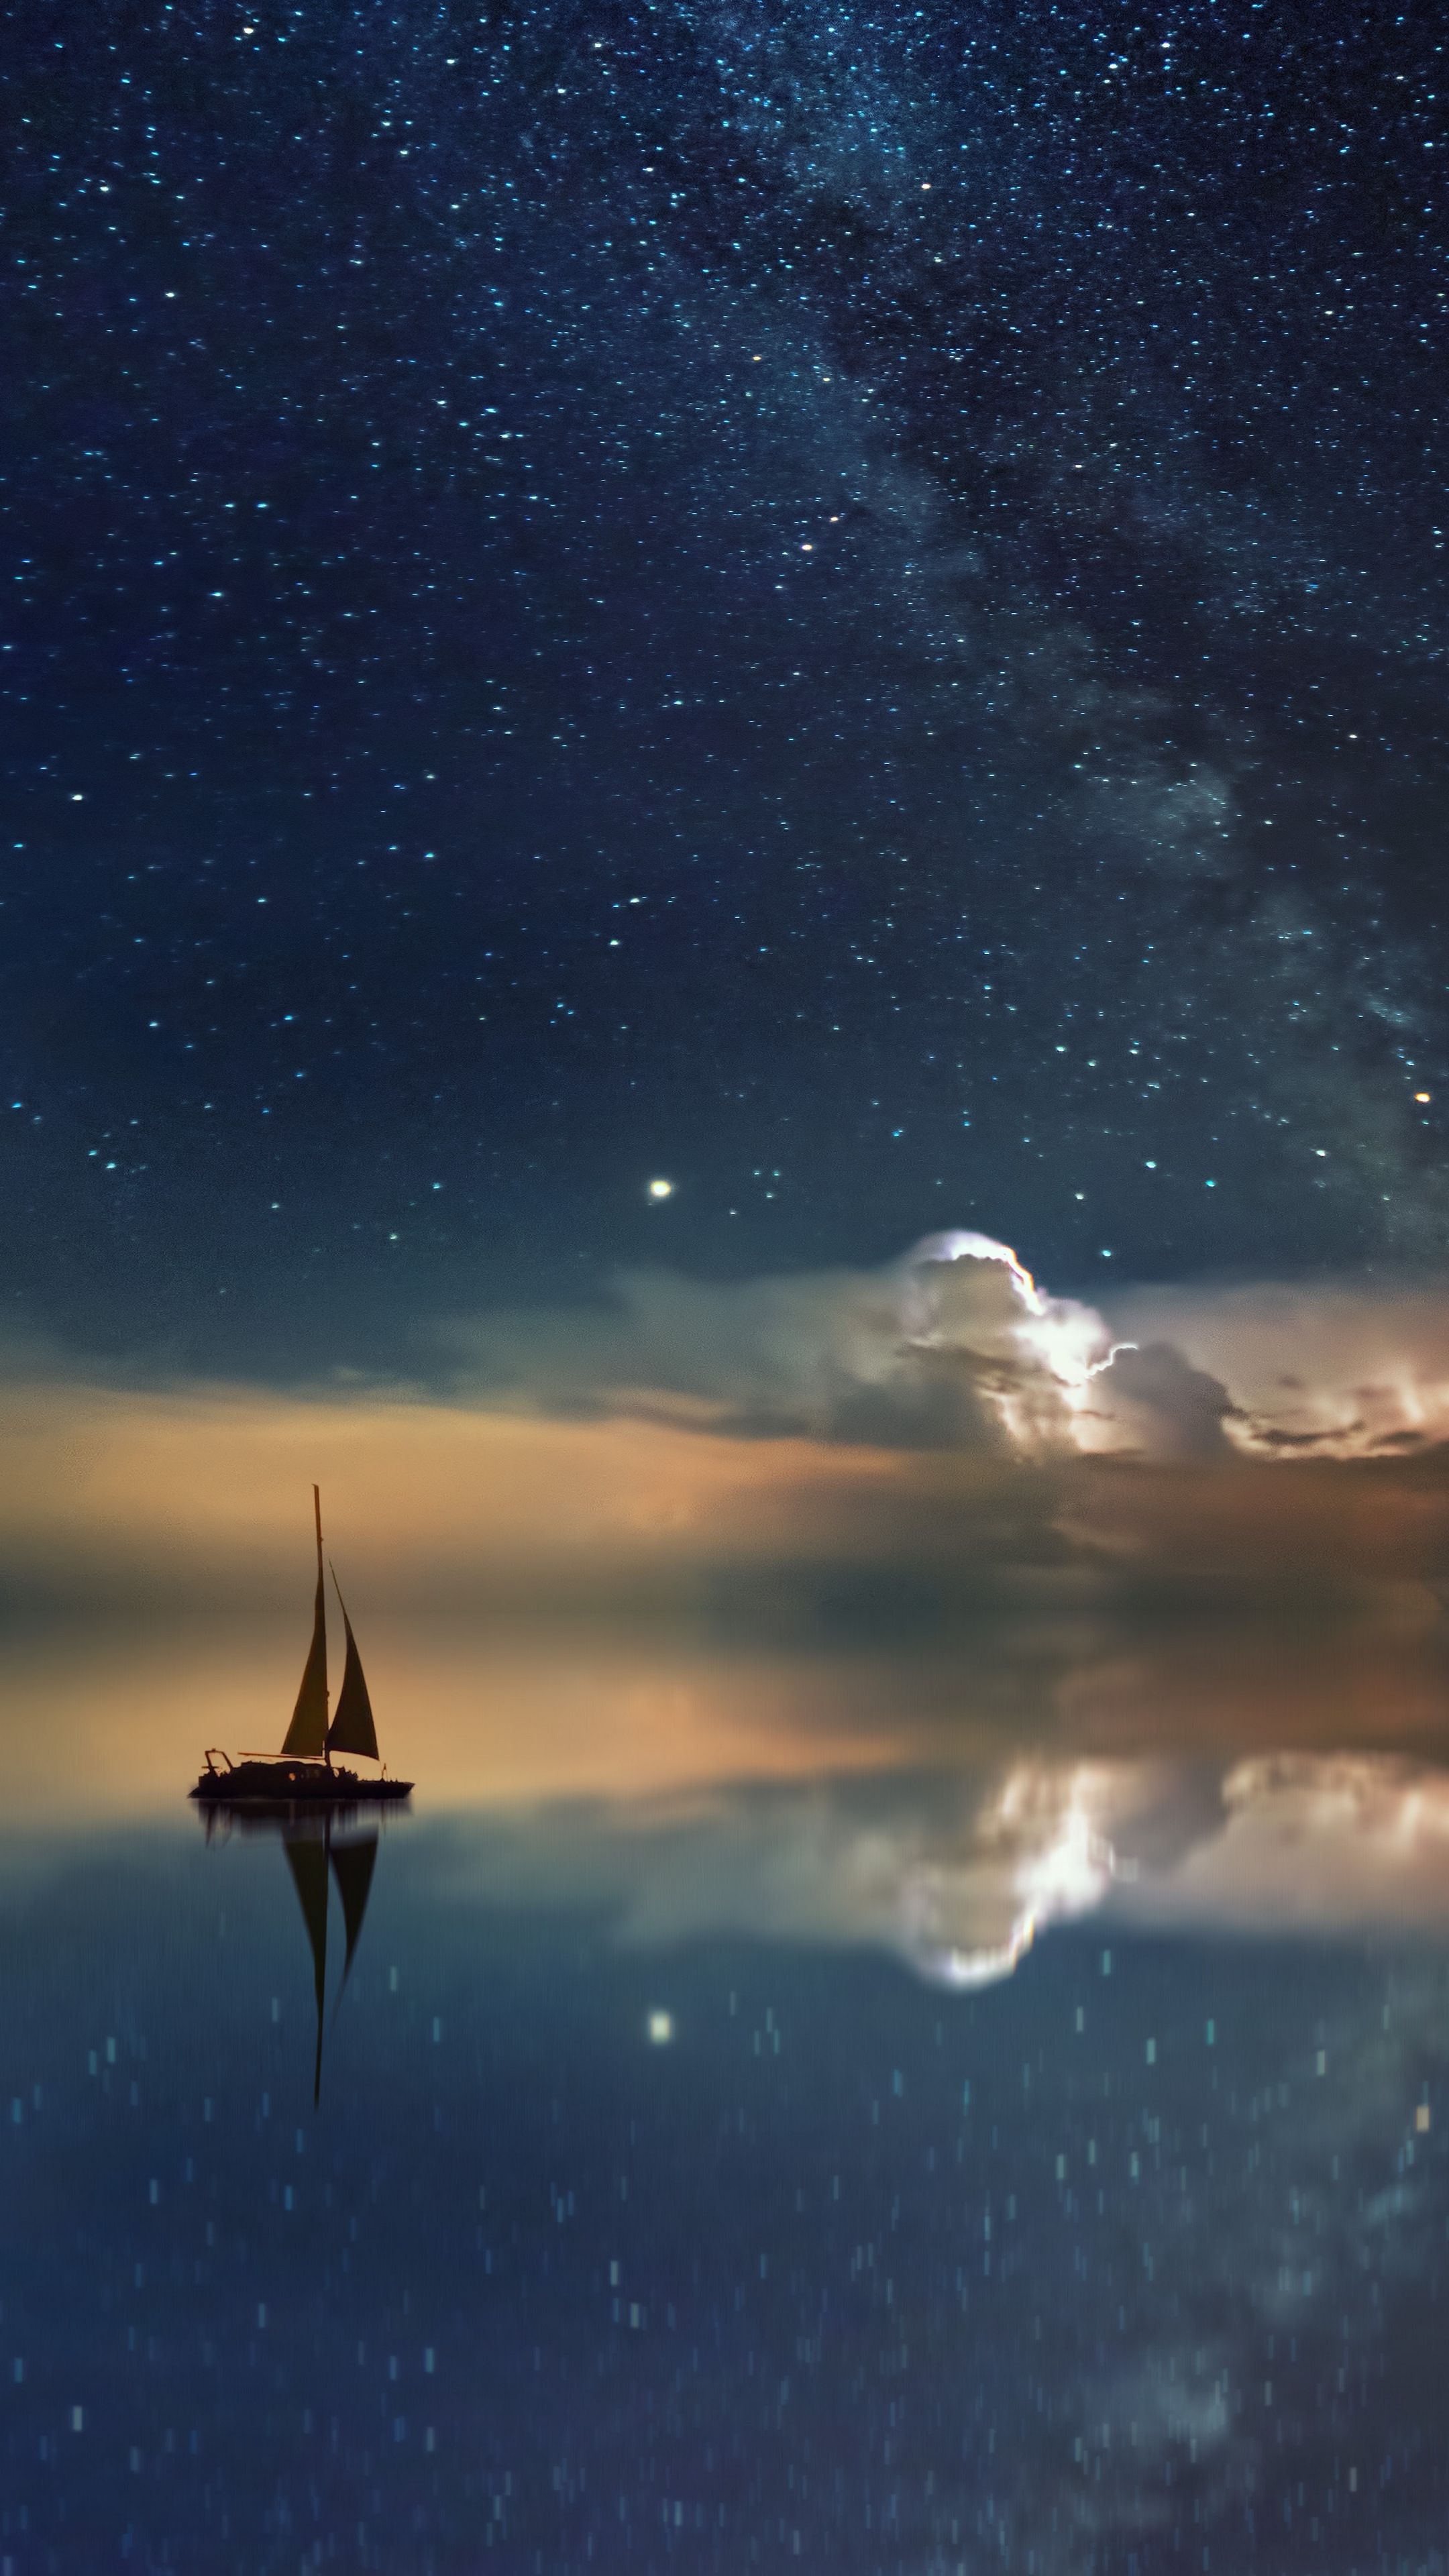 Sky starry sky, boat, reflection, sail, night #android #wallpaper